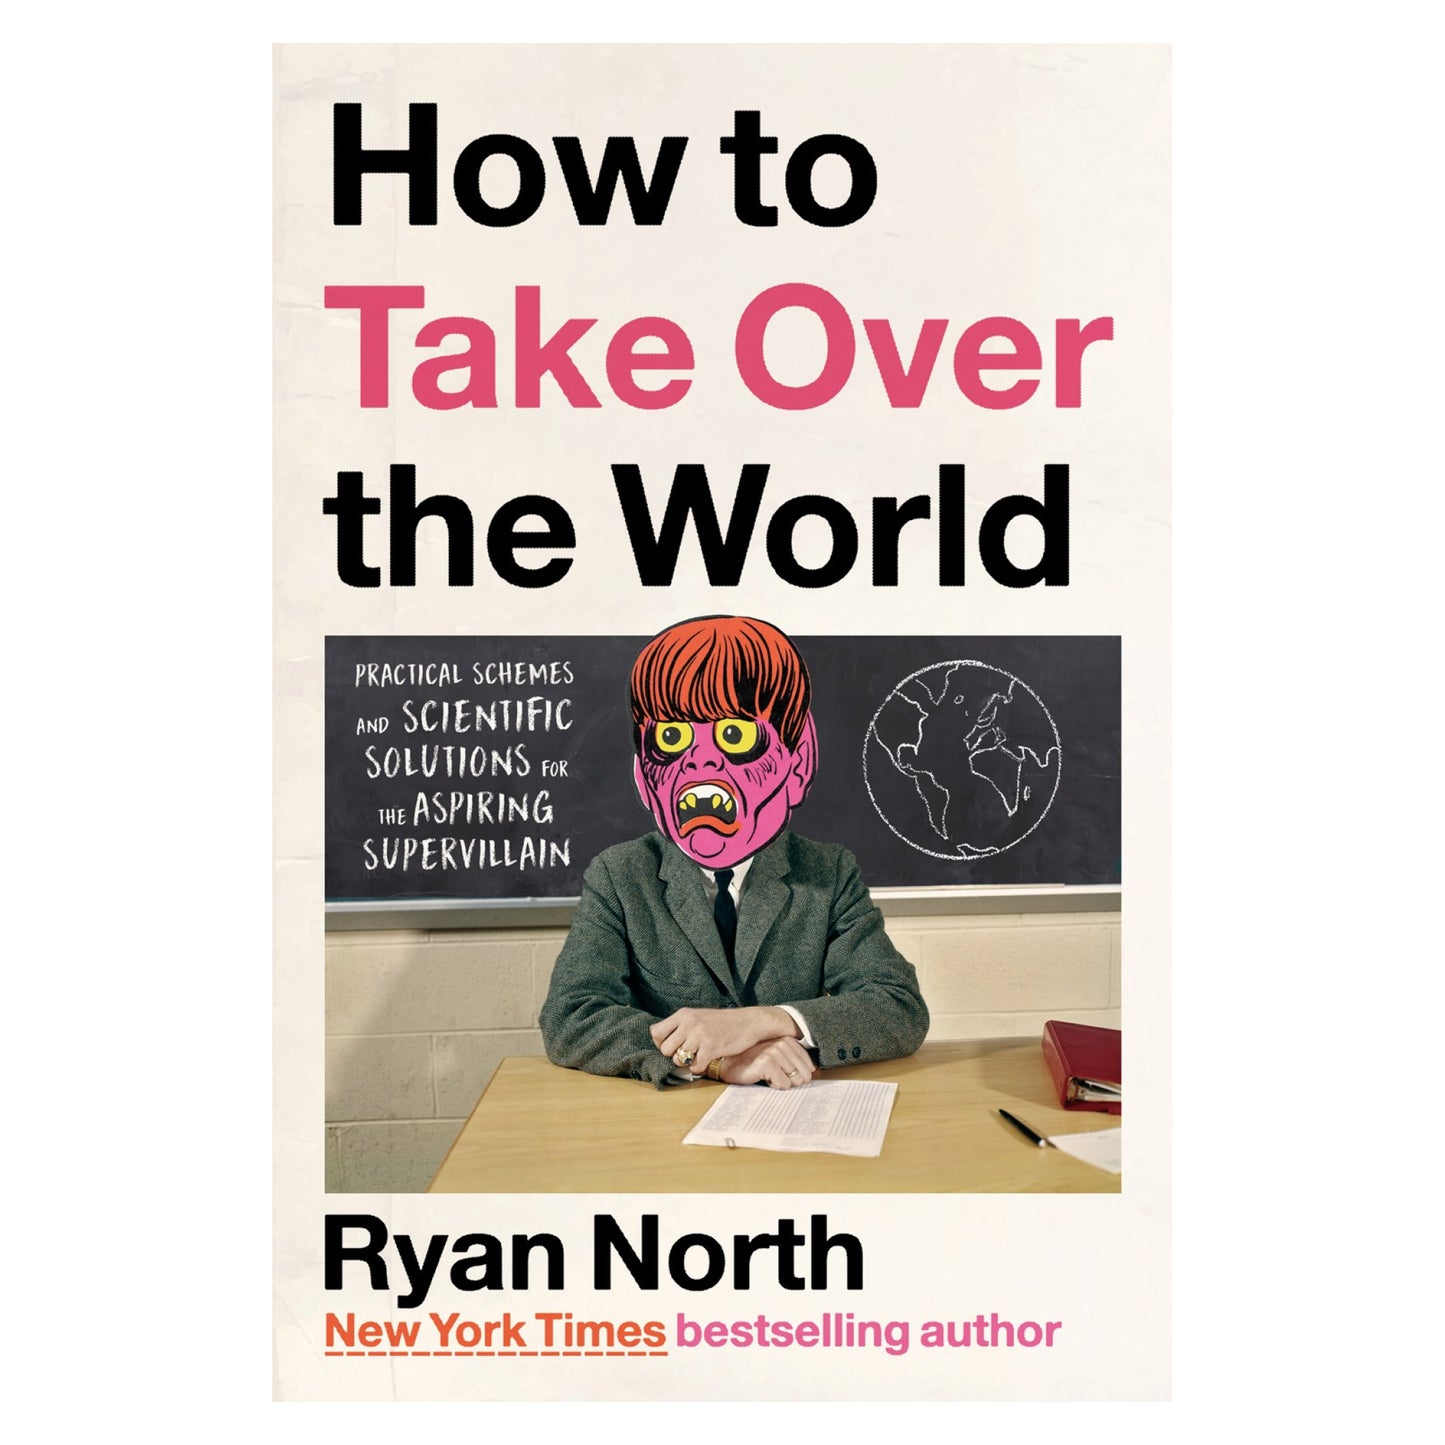 How To Take Over the World